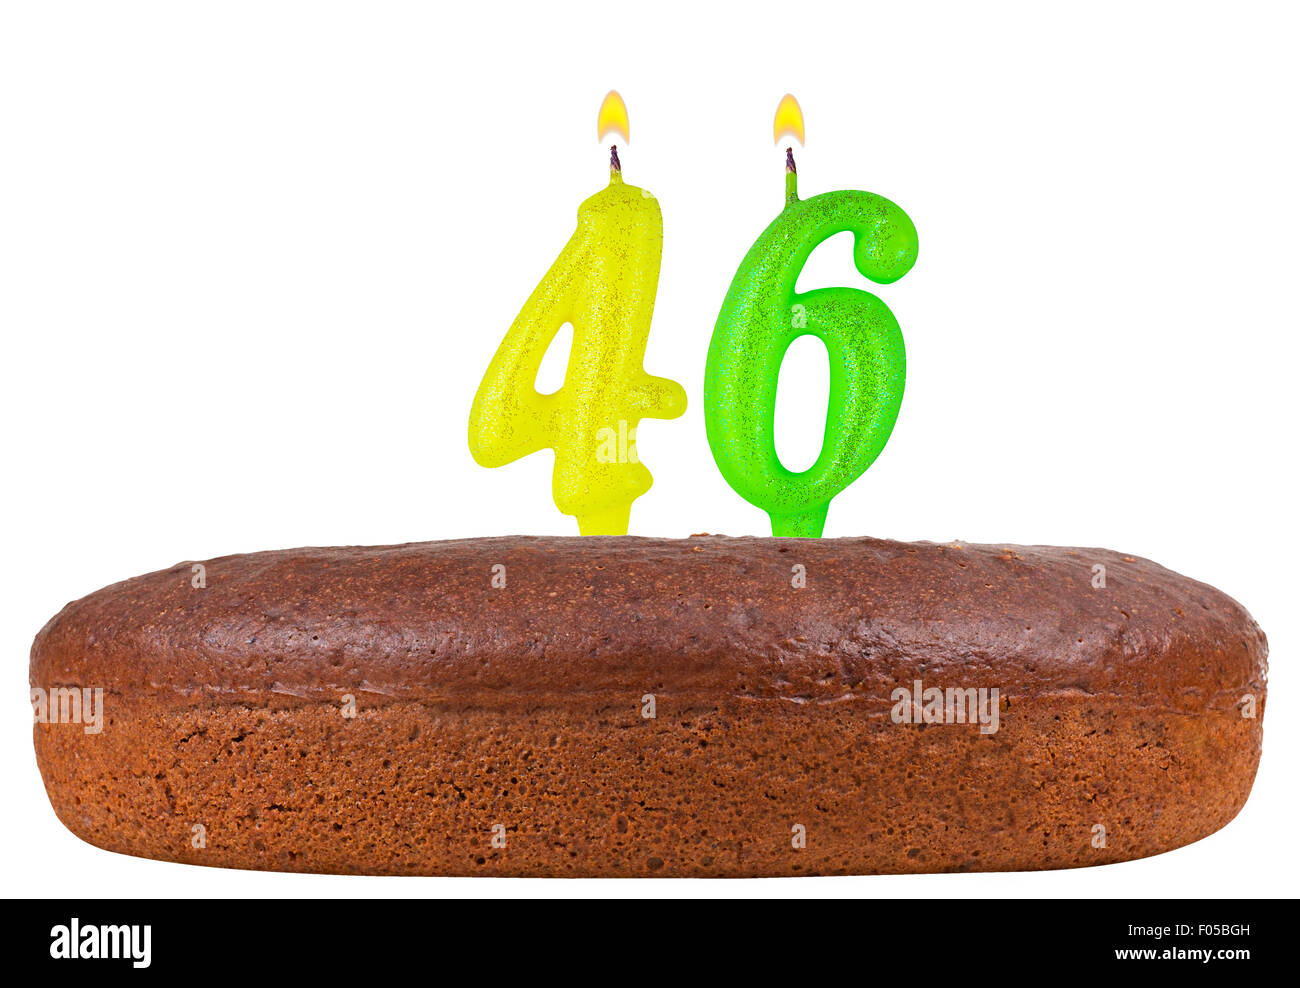 birthday cake with candles number 46 isolated on white background Stock Photo